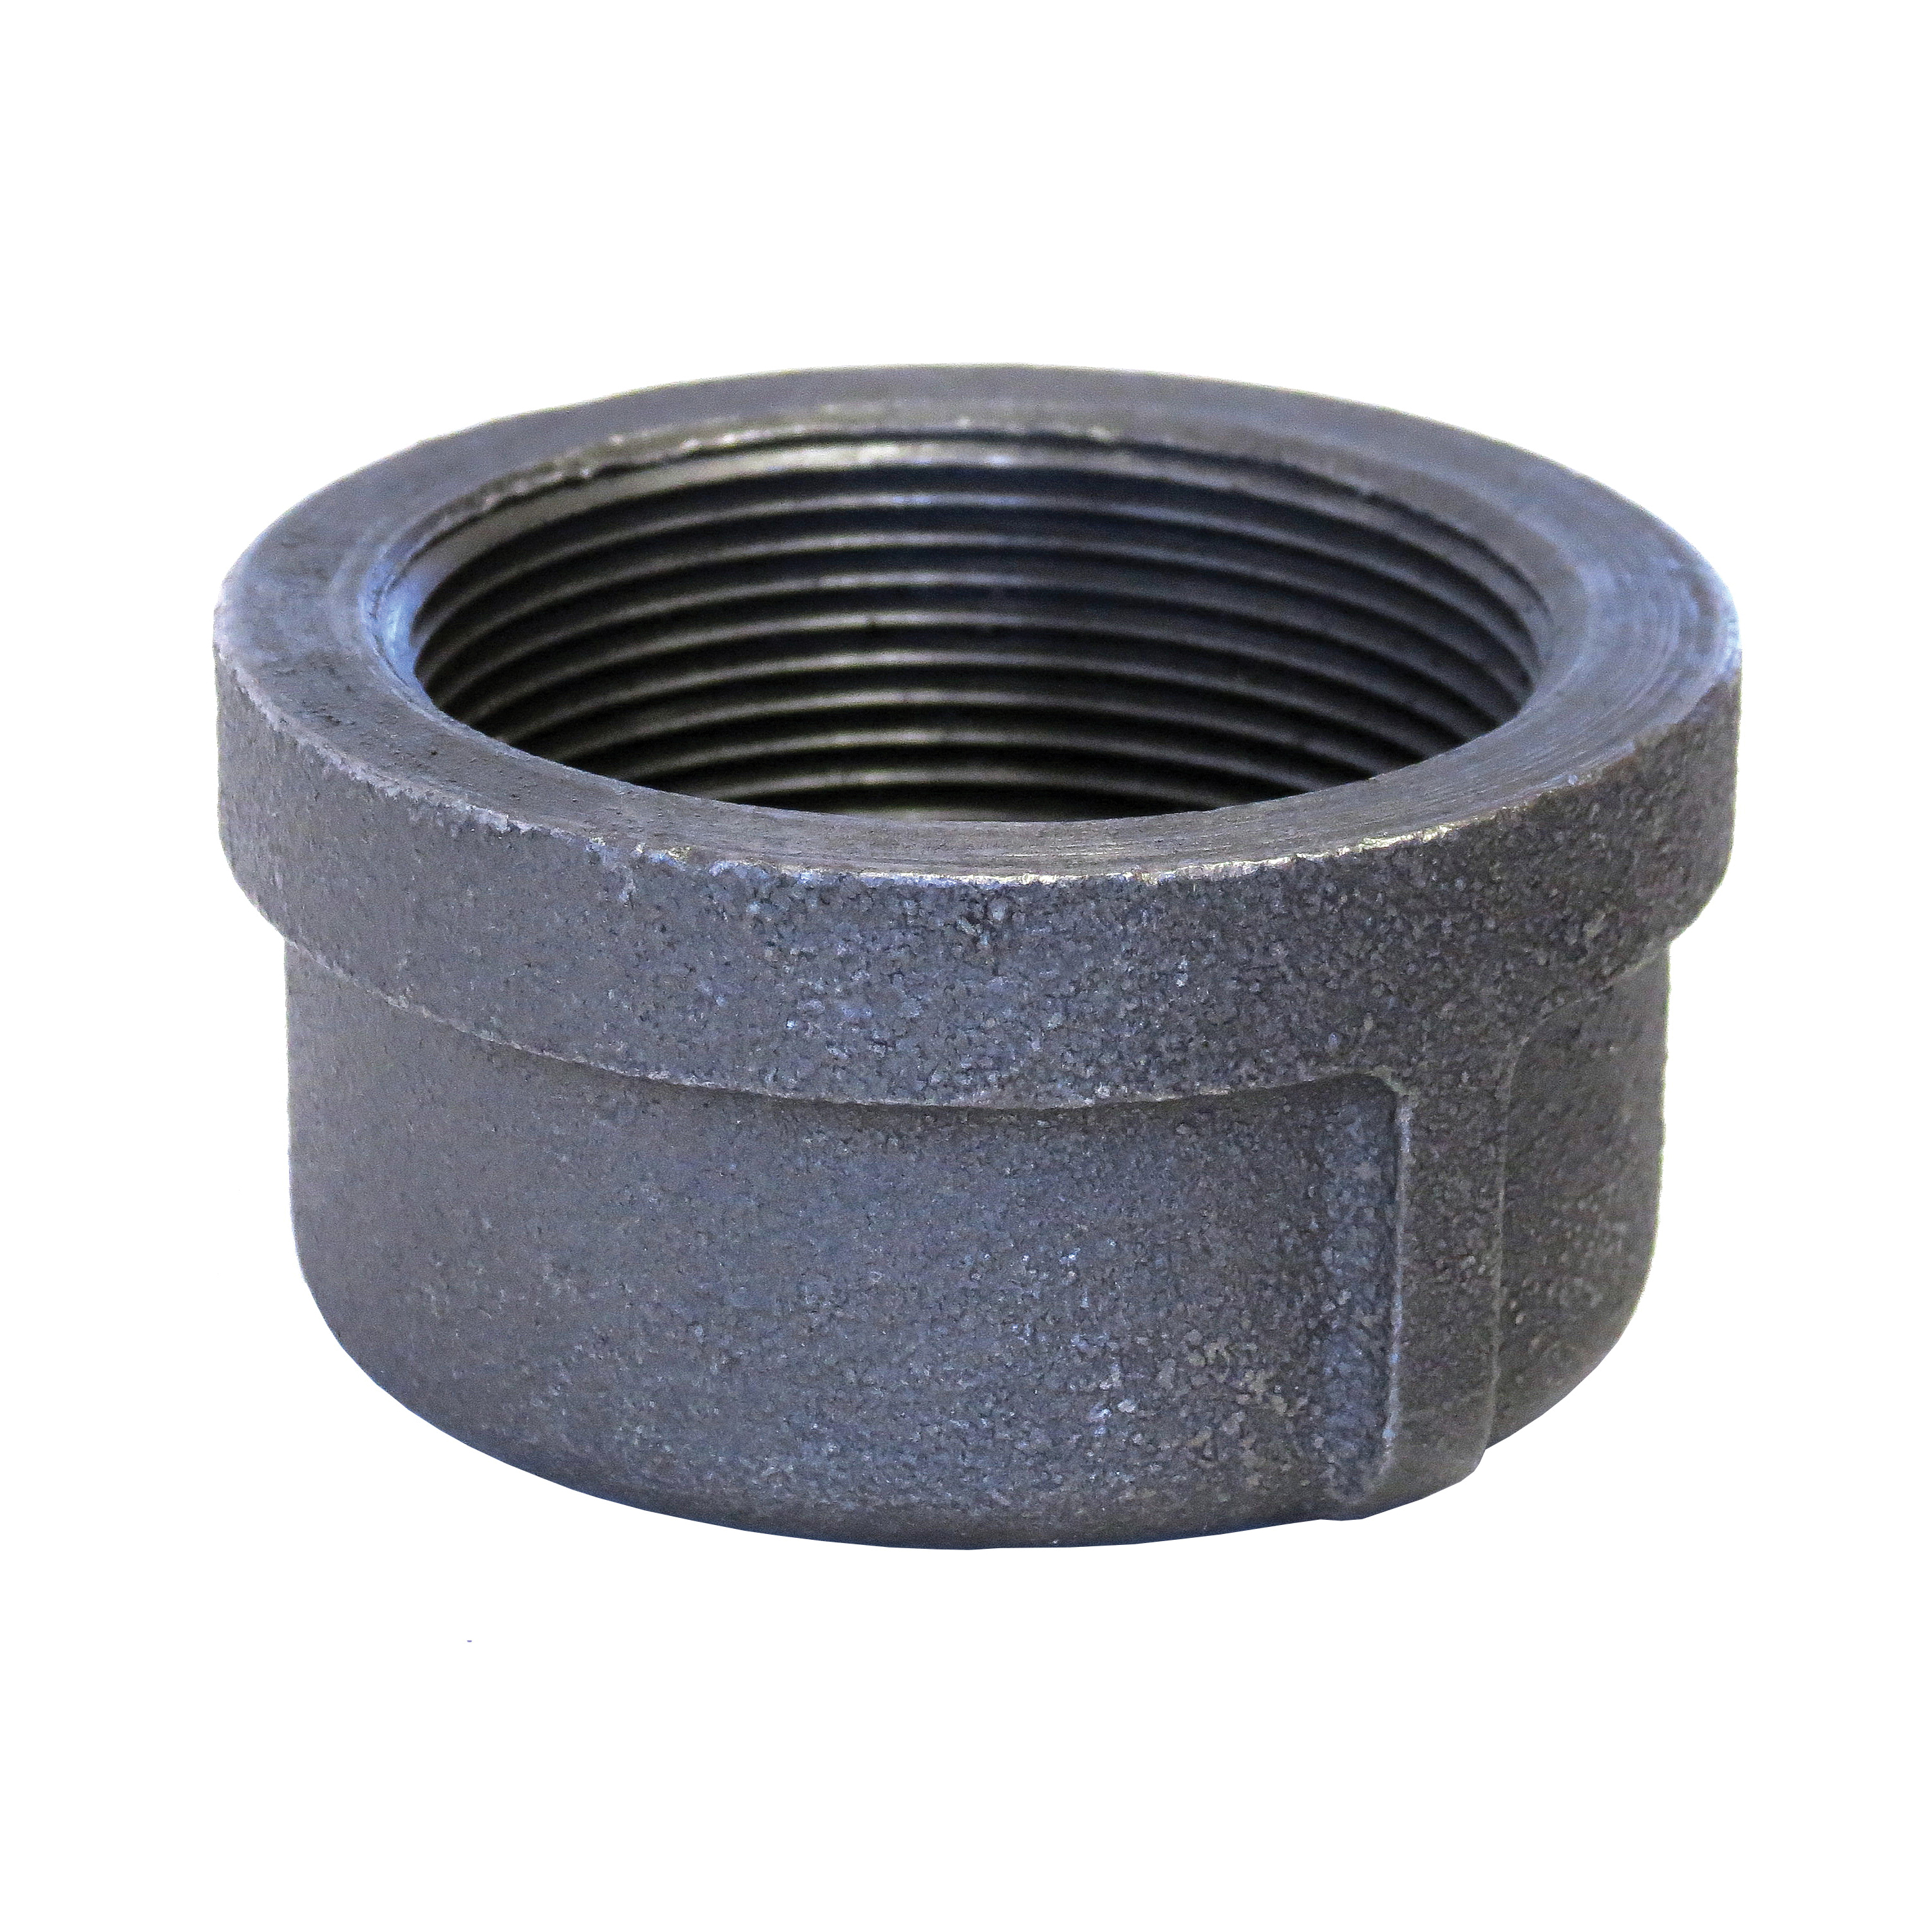 Anvil® 0319901005 FIG 1124 Standard Pipe Cap, 4 in Nominal, FNPT End Style, 150 lb, Malleable Iron, Galvanized, Domestic